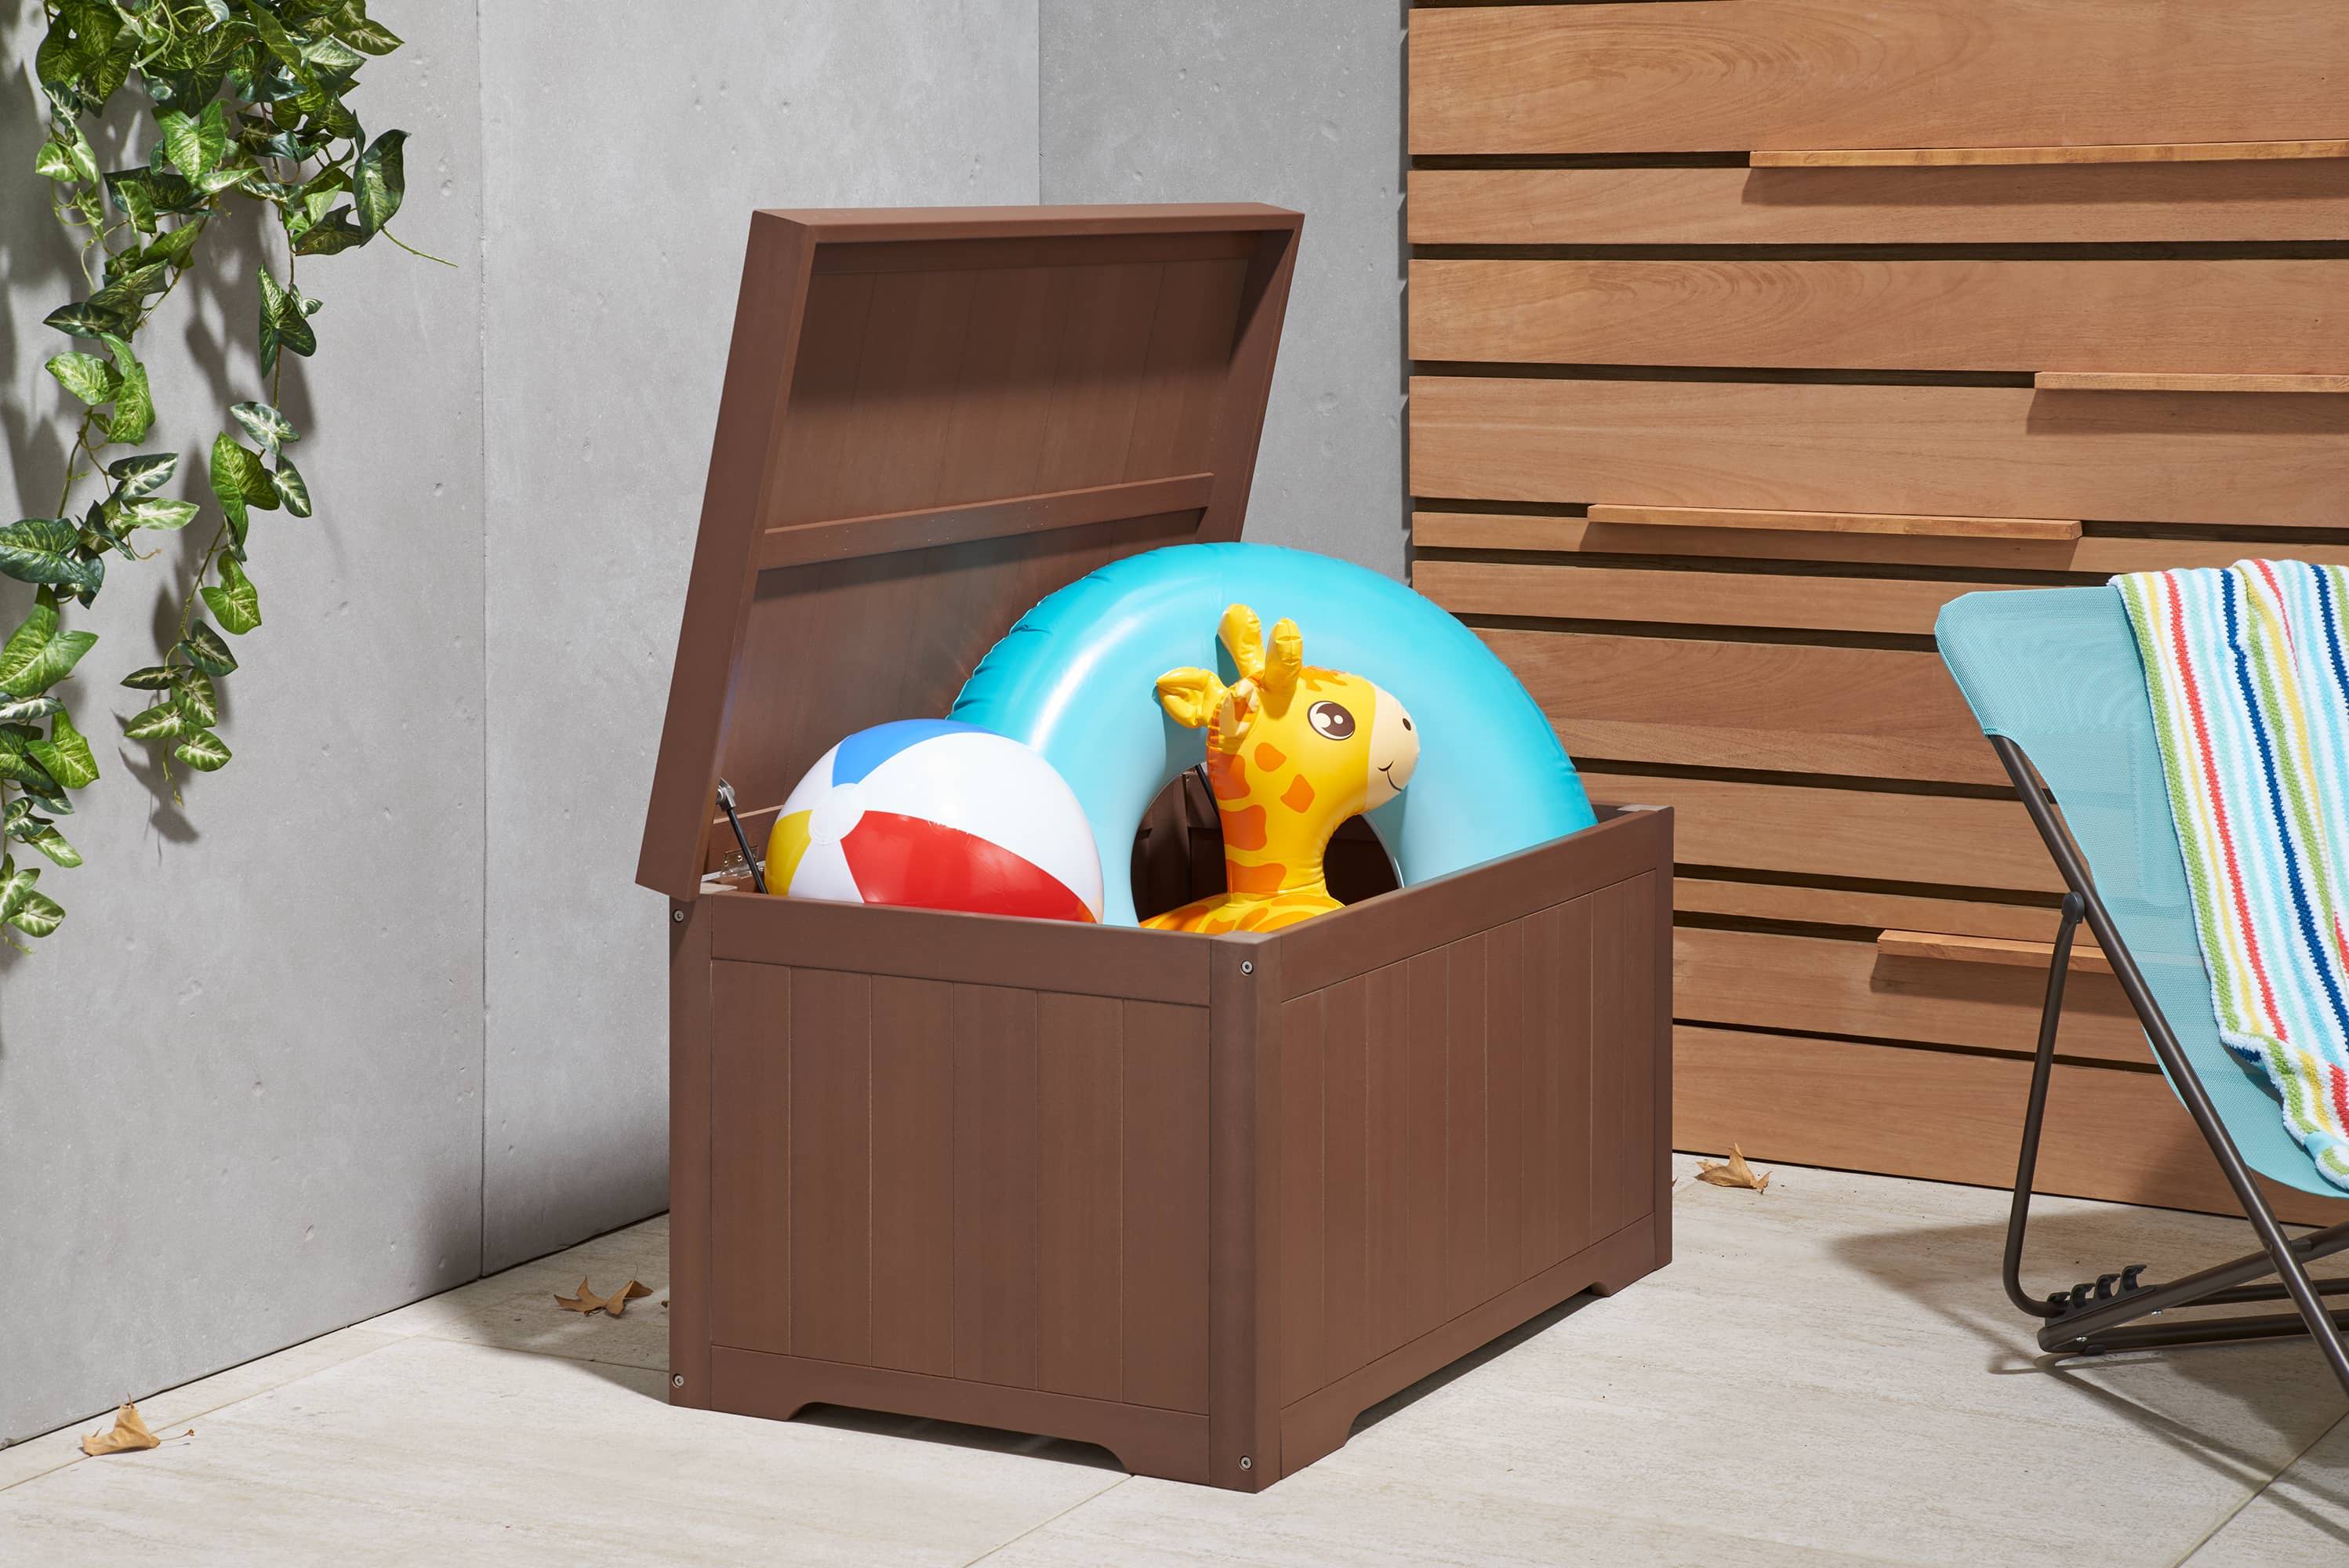 outdoor patio storage box filled with swimming pool items